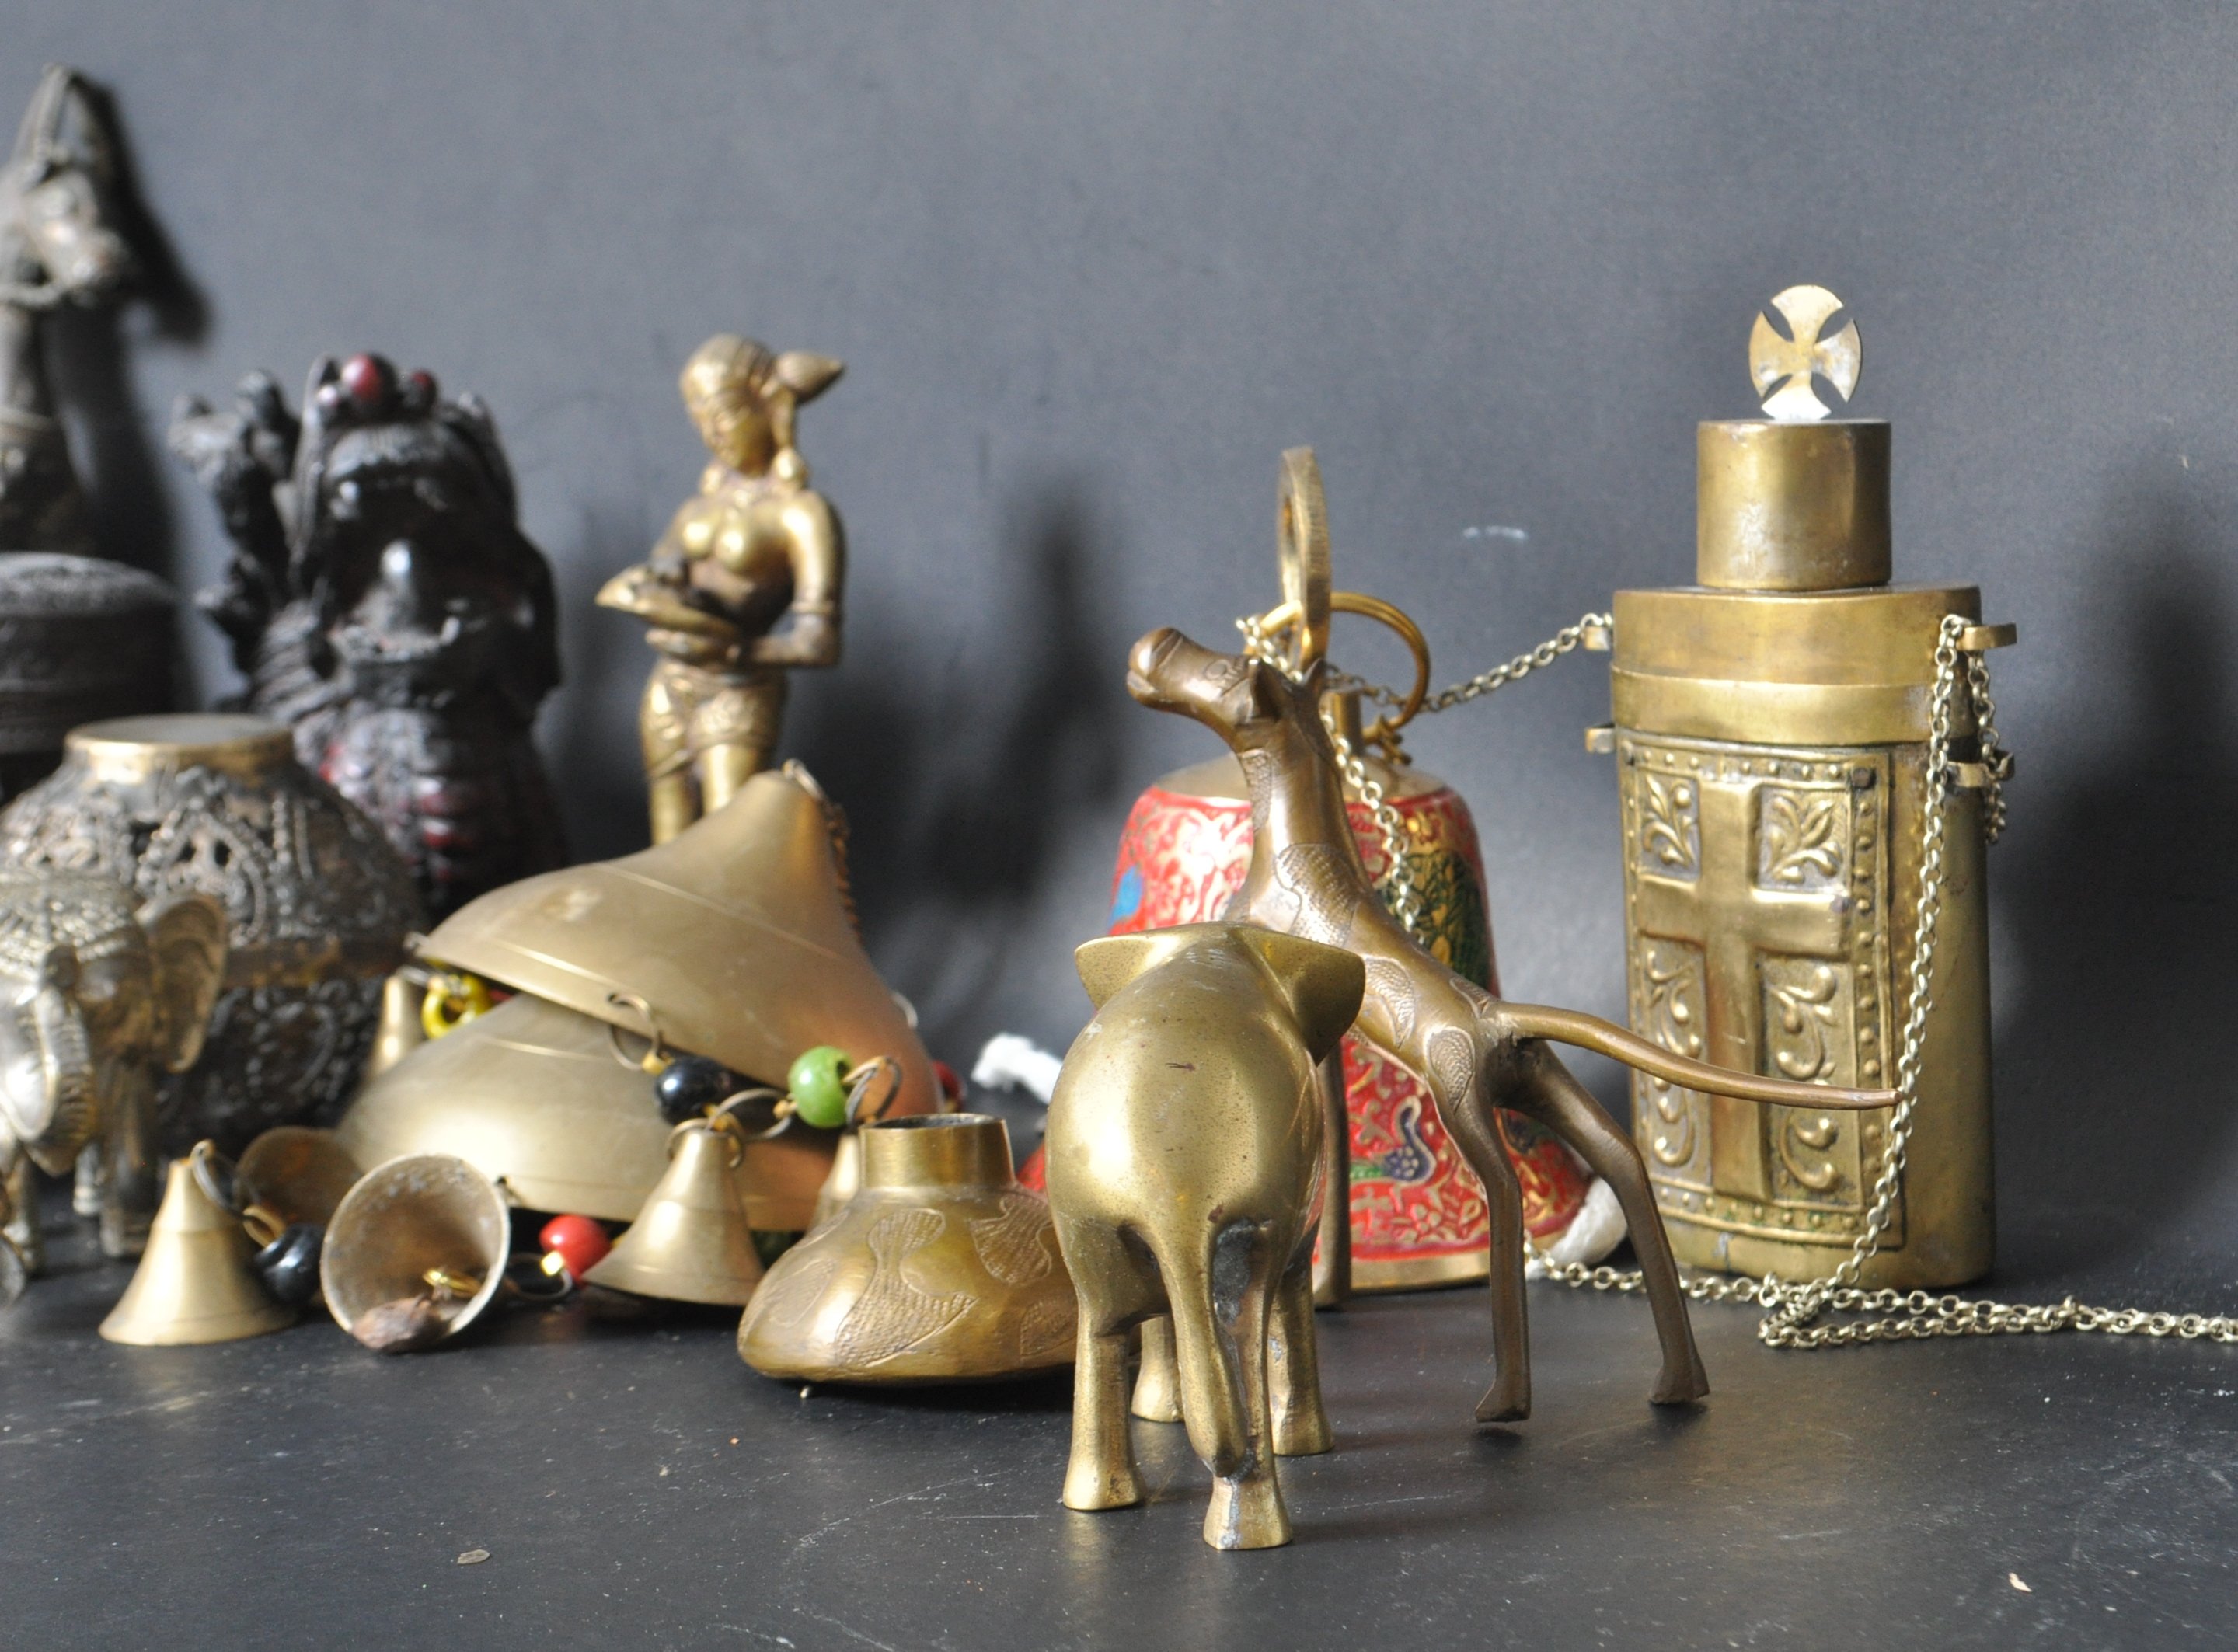 LARGE COLLECTION OF BRASS WARE AND HINDU FIGURINES - Image 5 of 9